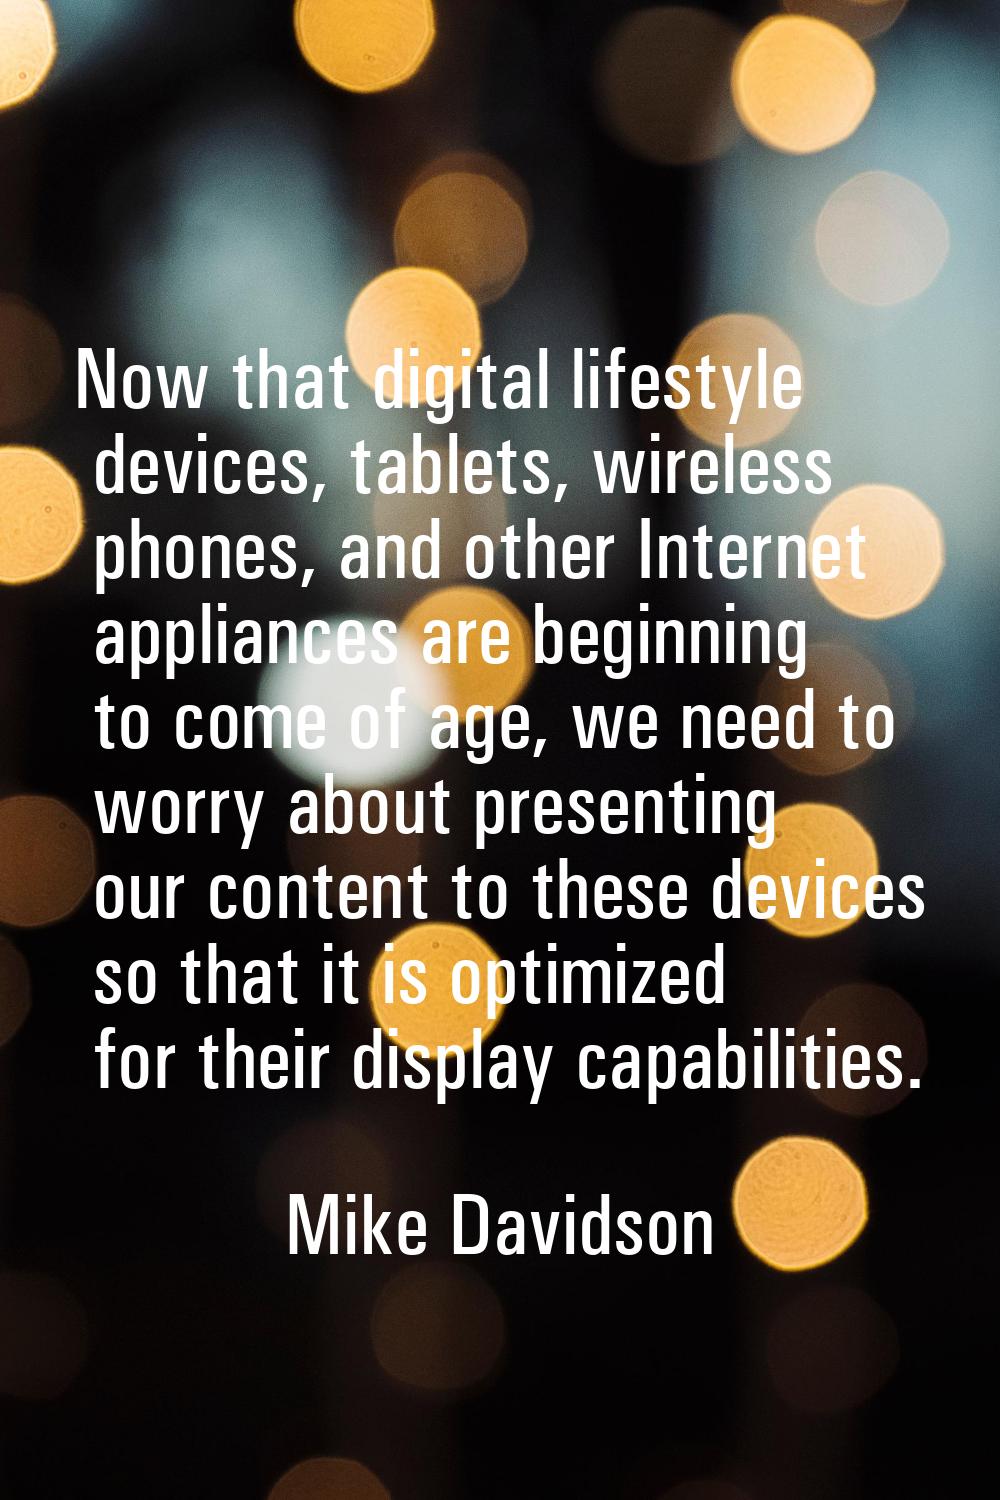 Now that digital lifestyle devices, tablets, wireless phones, and other Internet appliances are beg